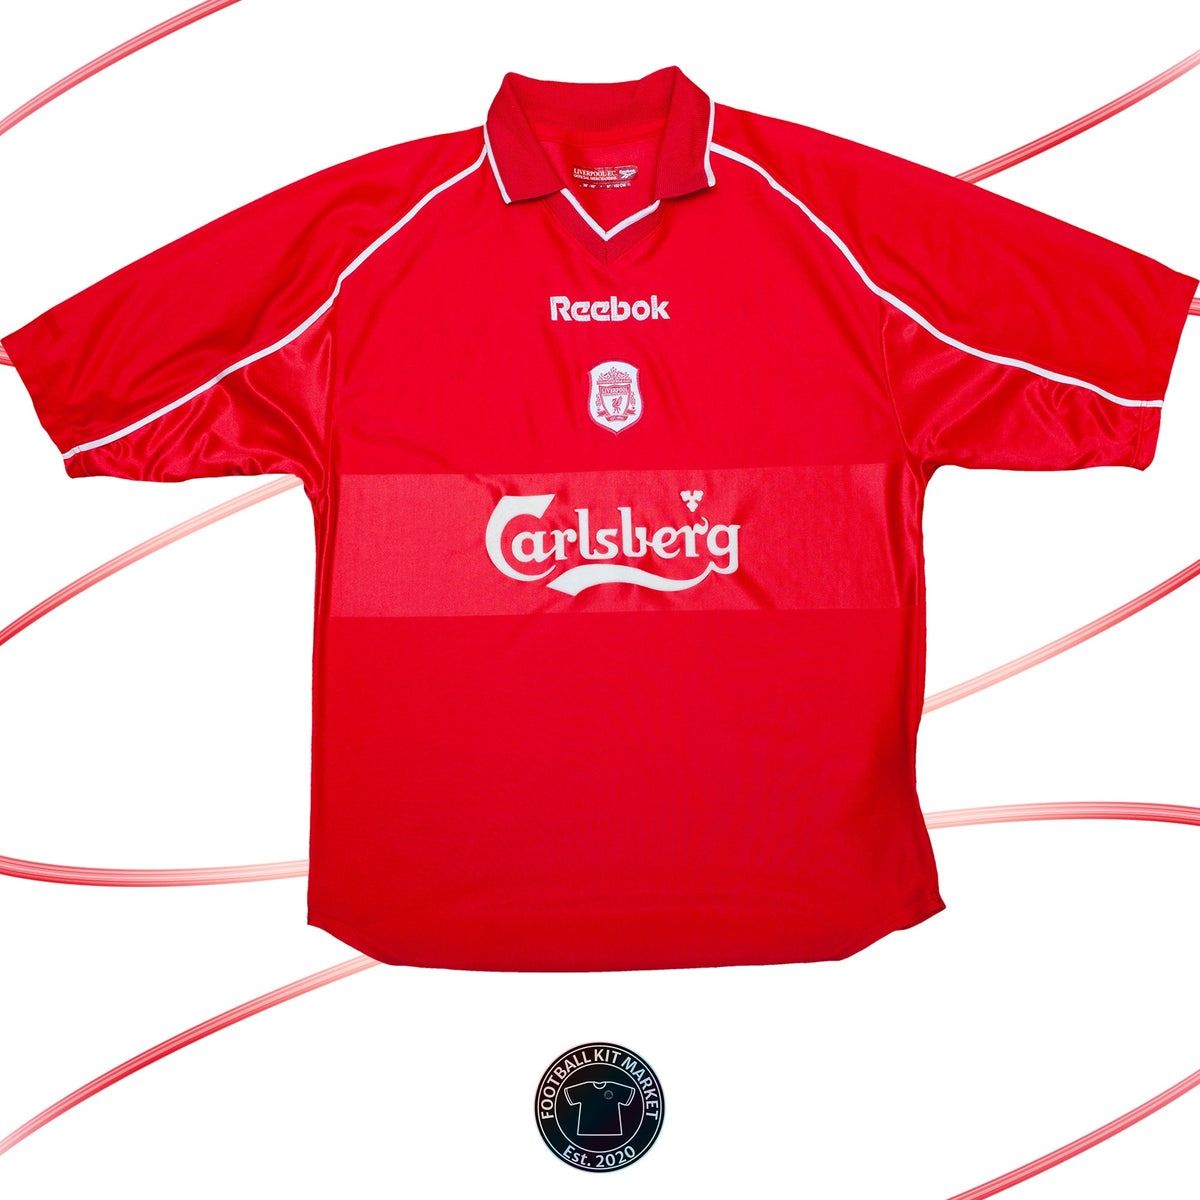 Genuine LIVERPOOL Home Shirt (2000-2002) - REEBOK (M) - Product Image from Football Kit Market